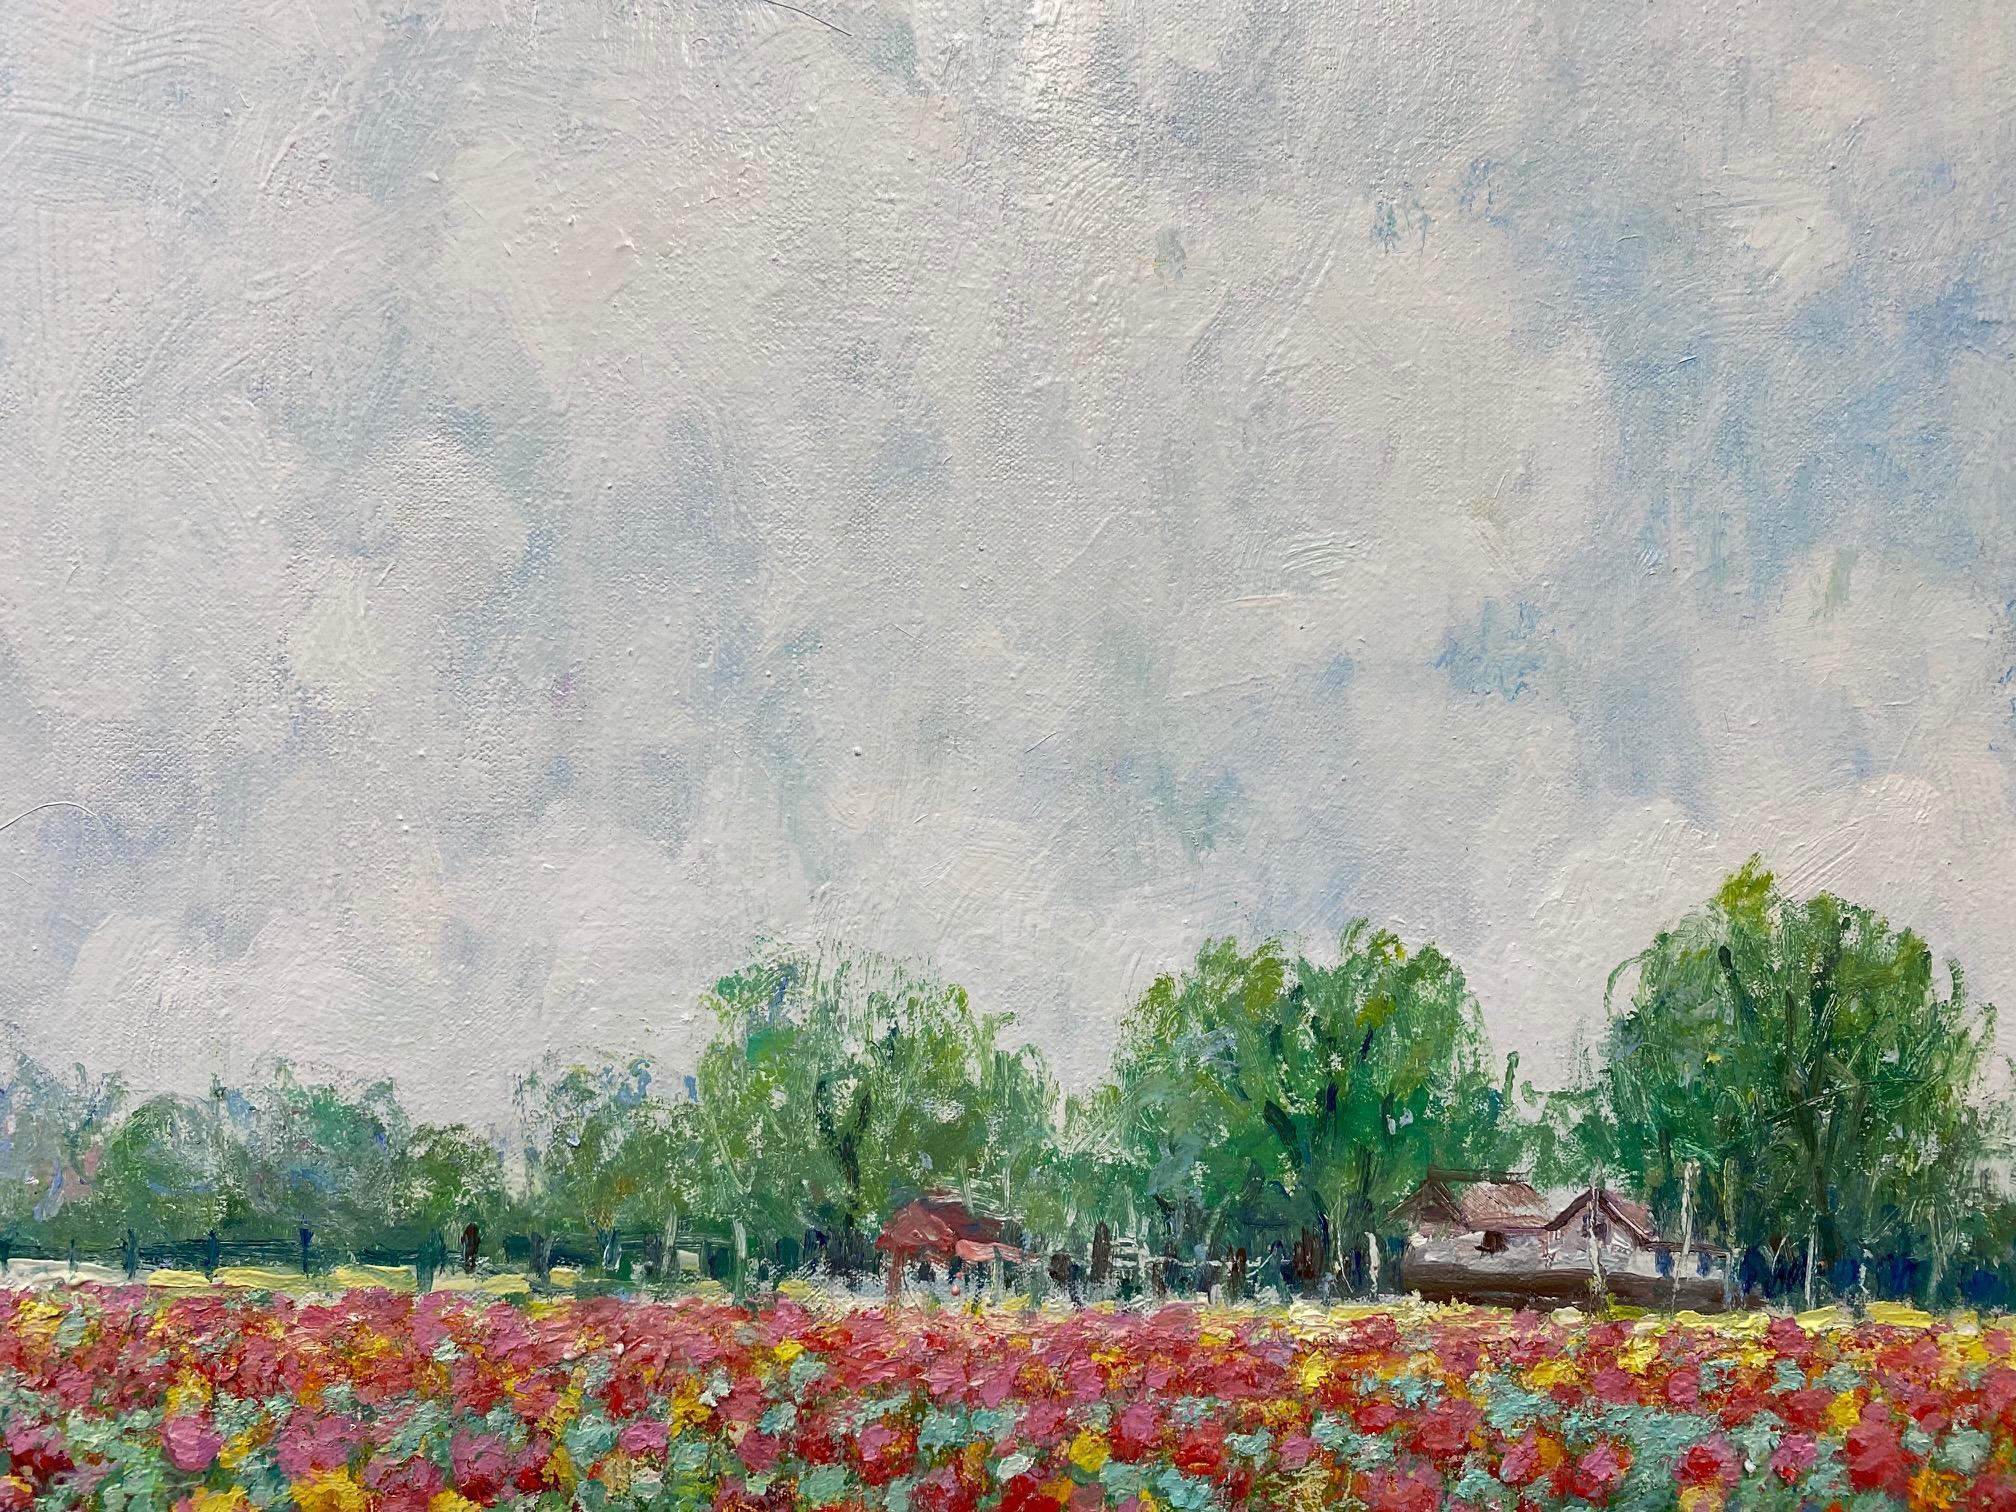 Lush and dreamy acres of seemingly unending tulips in a mosaic of pink, red, orange and yellow are being watched over by equally infinite white cotton candy clouds.  These tulips from heaven are presented as a contemporary expressionist floral